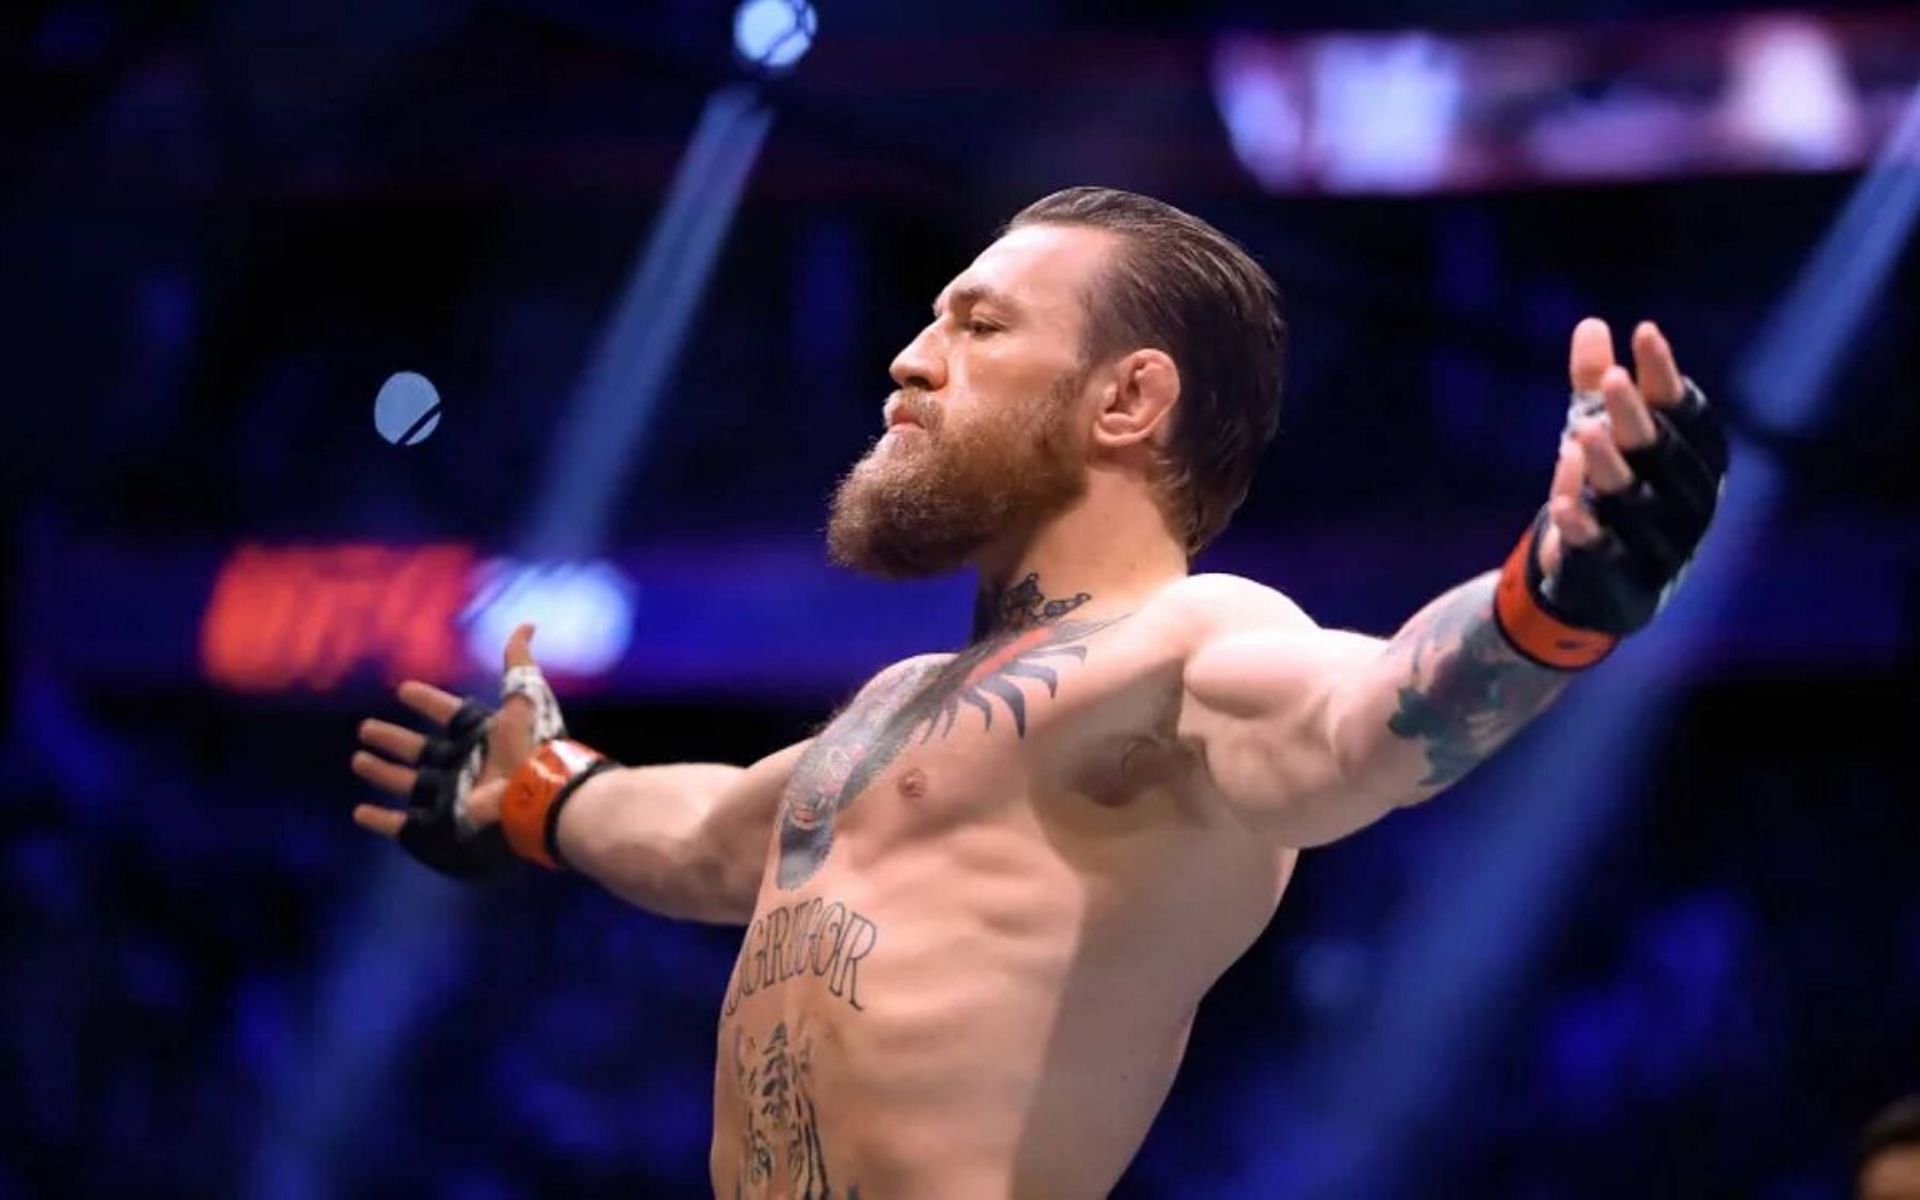 What changes does Conor McGregor need to make to ensure UFC success upon his return?